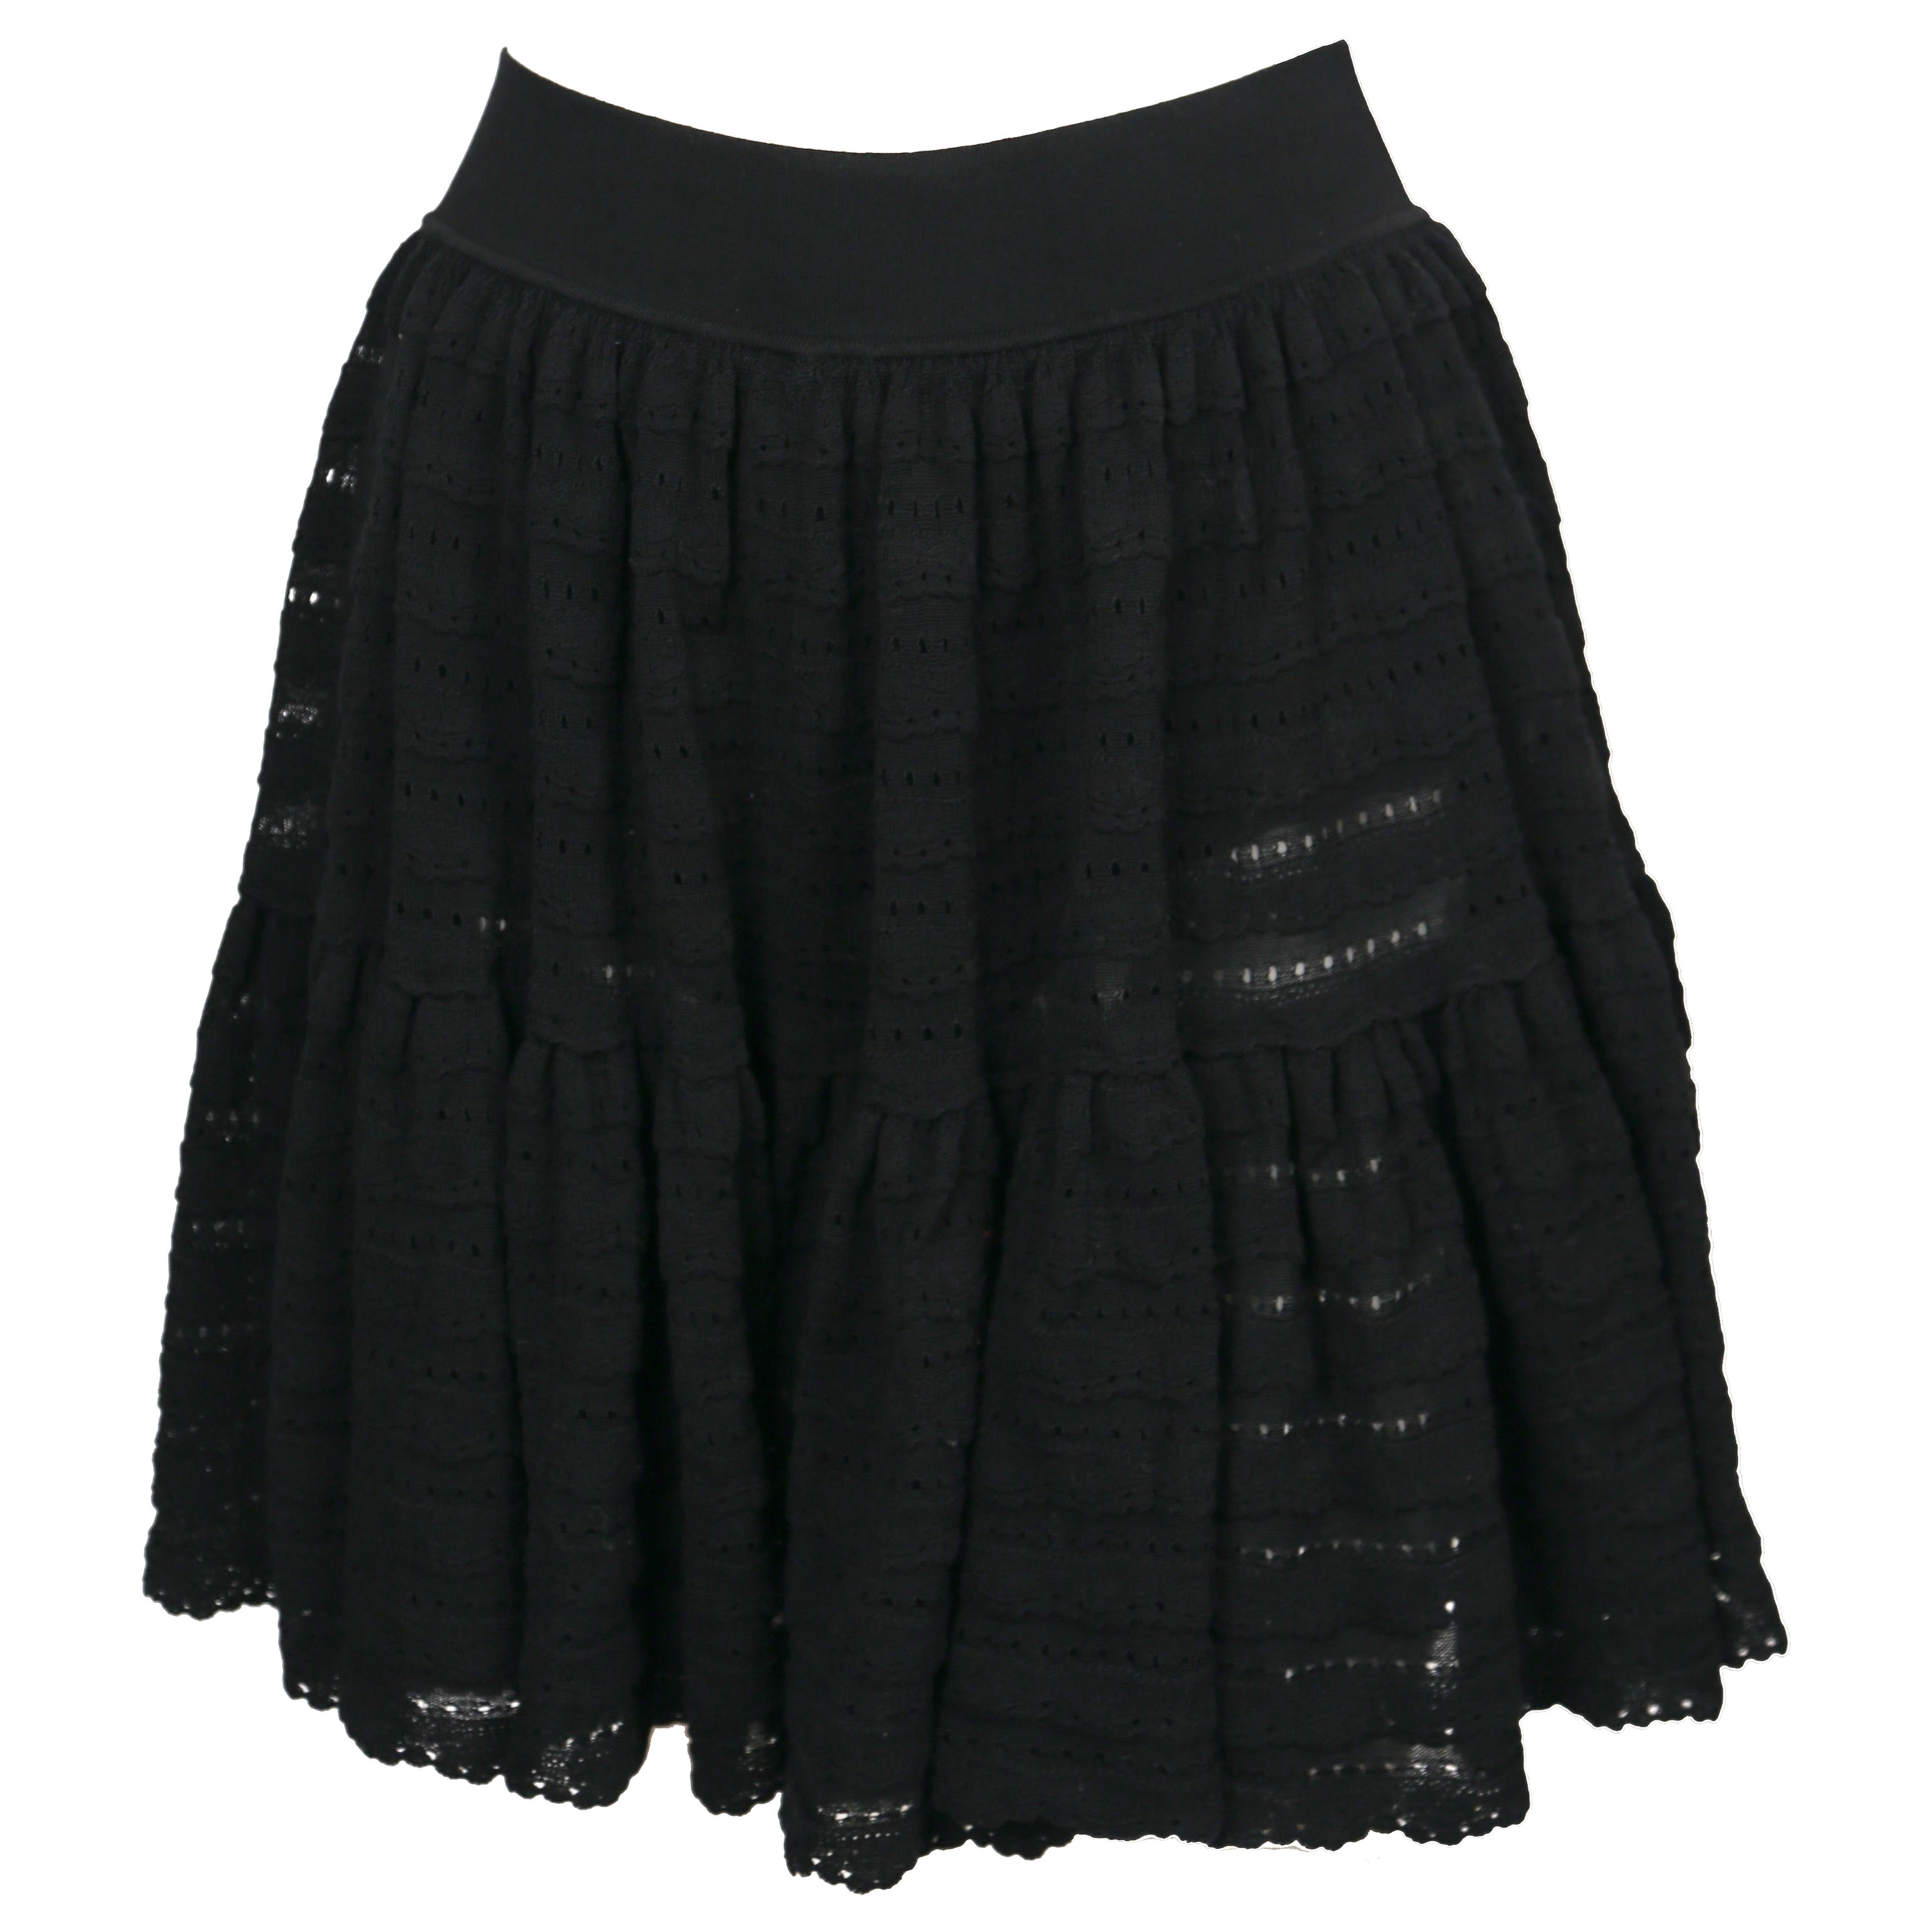 2000's AZZEDINE ALAIA black pointelle knit skirt with ruffles and ...